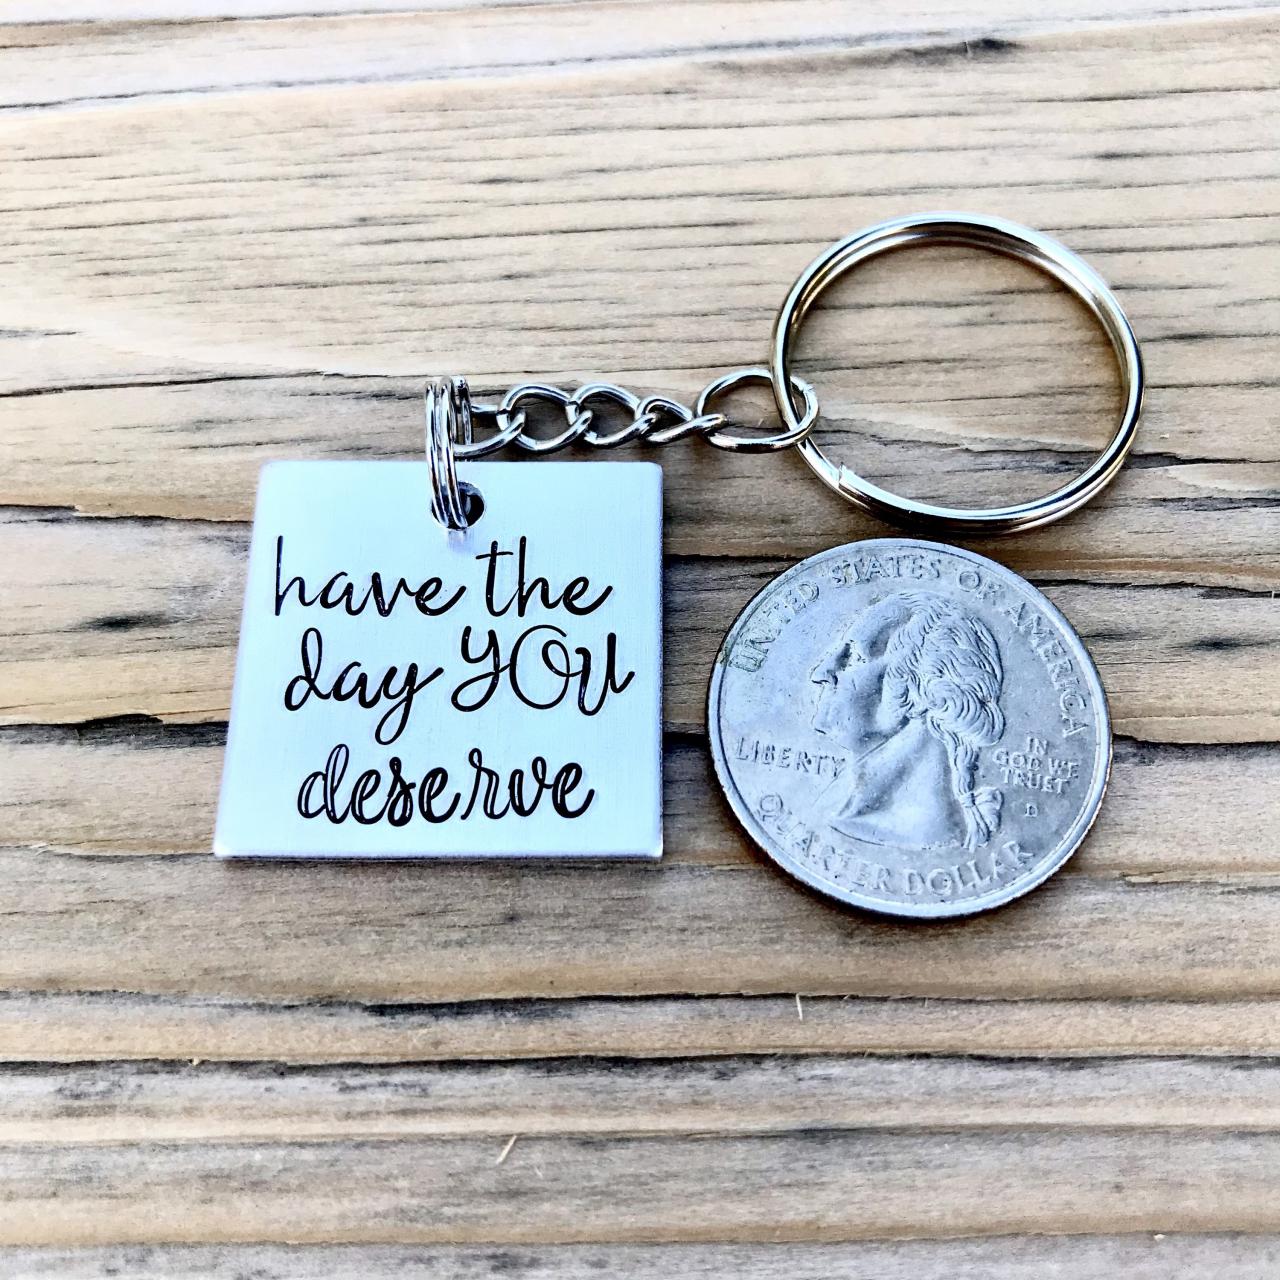 Have The Day You Deserve, Silver Color Metal, Lightweight, Thoughtful Gift, Keychain, Hand Stamped Metal, Metal Stamped, Son, Daughter, Wife